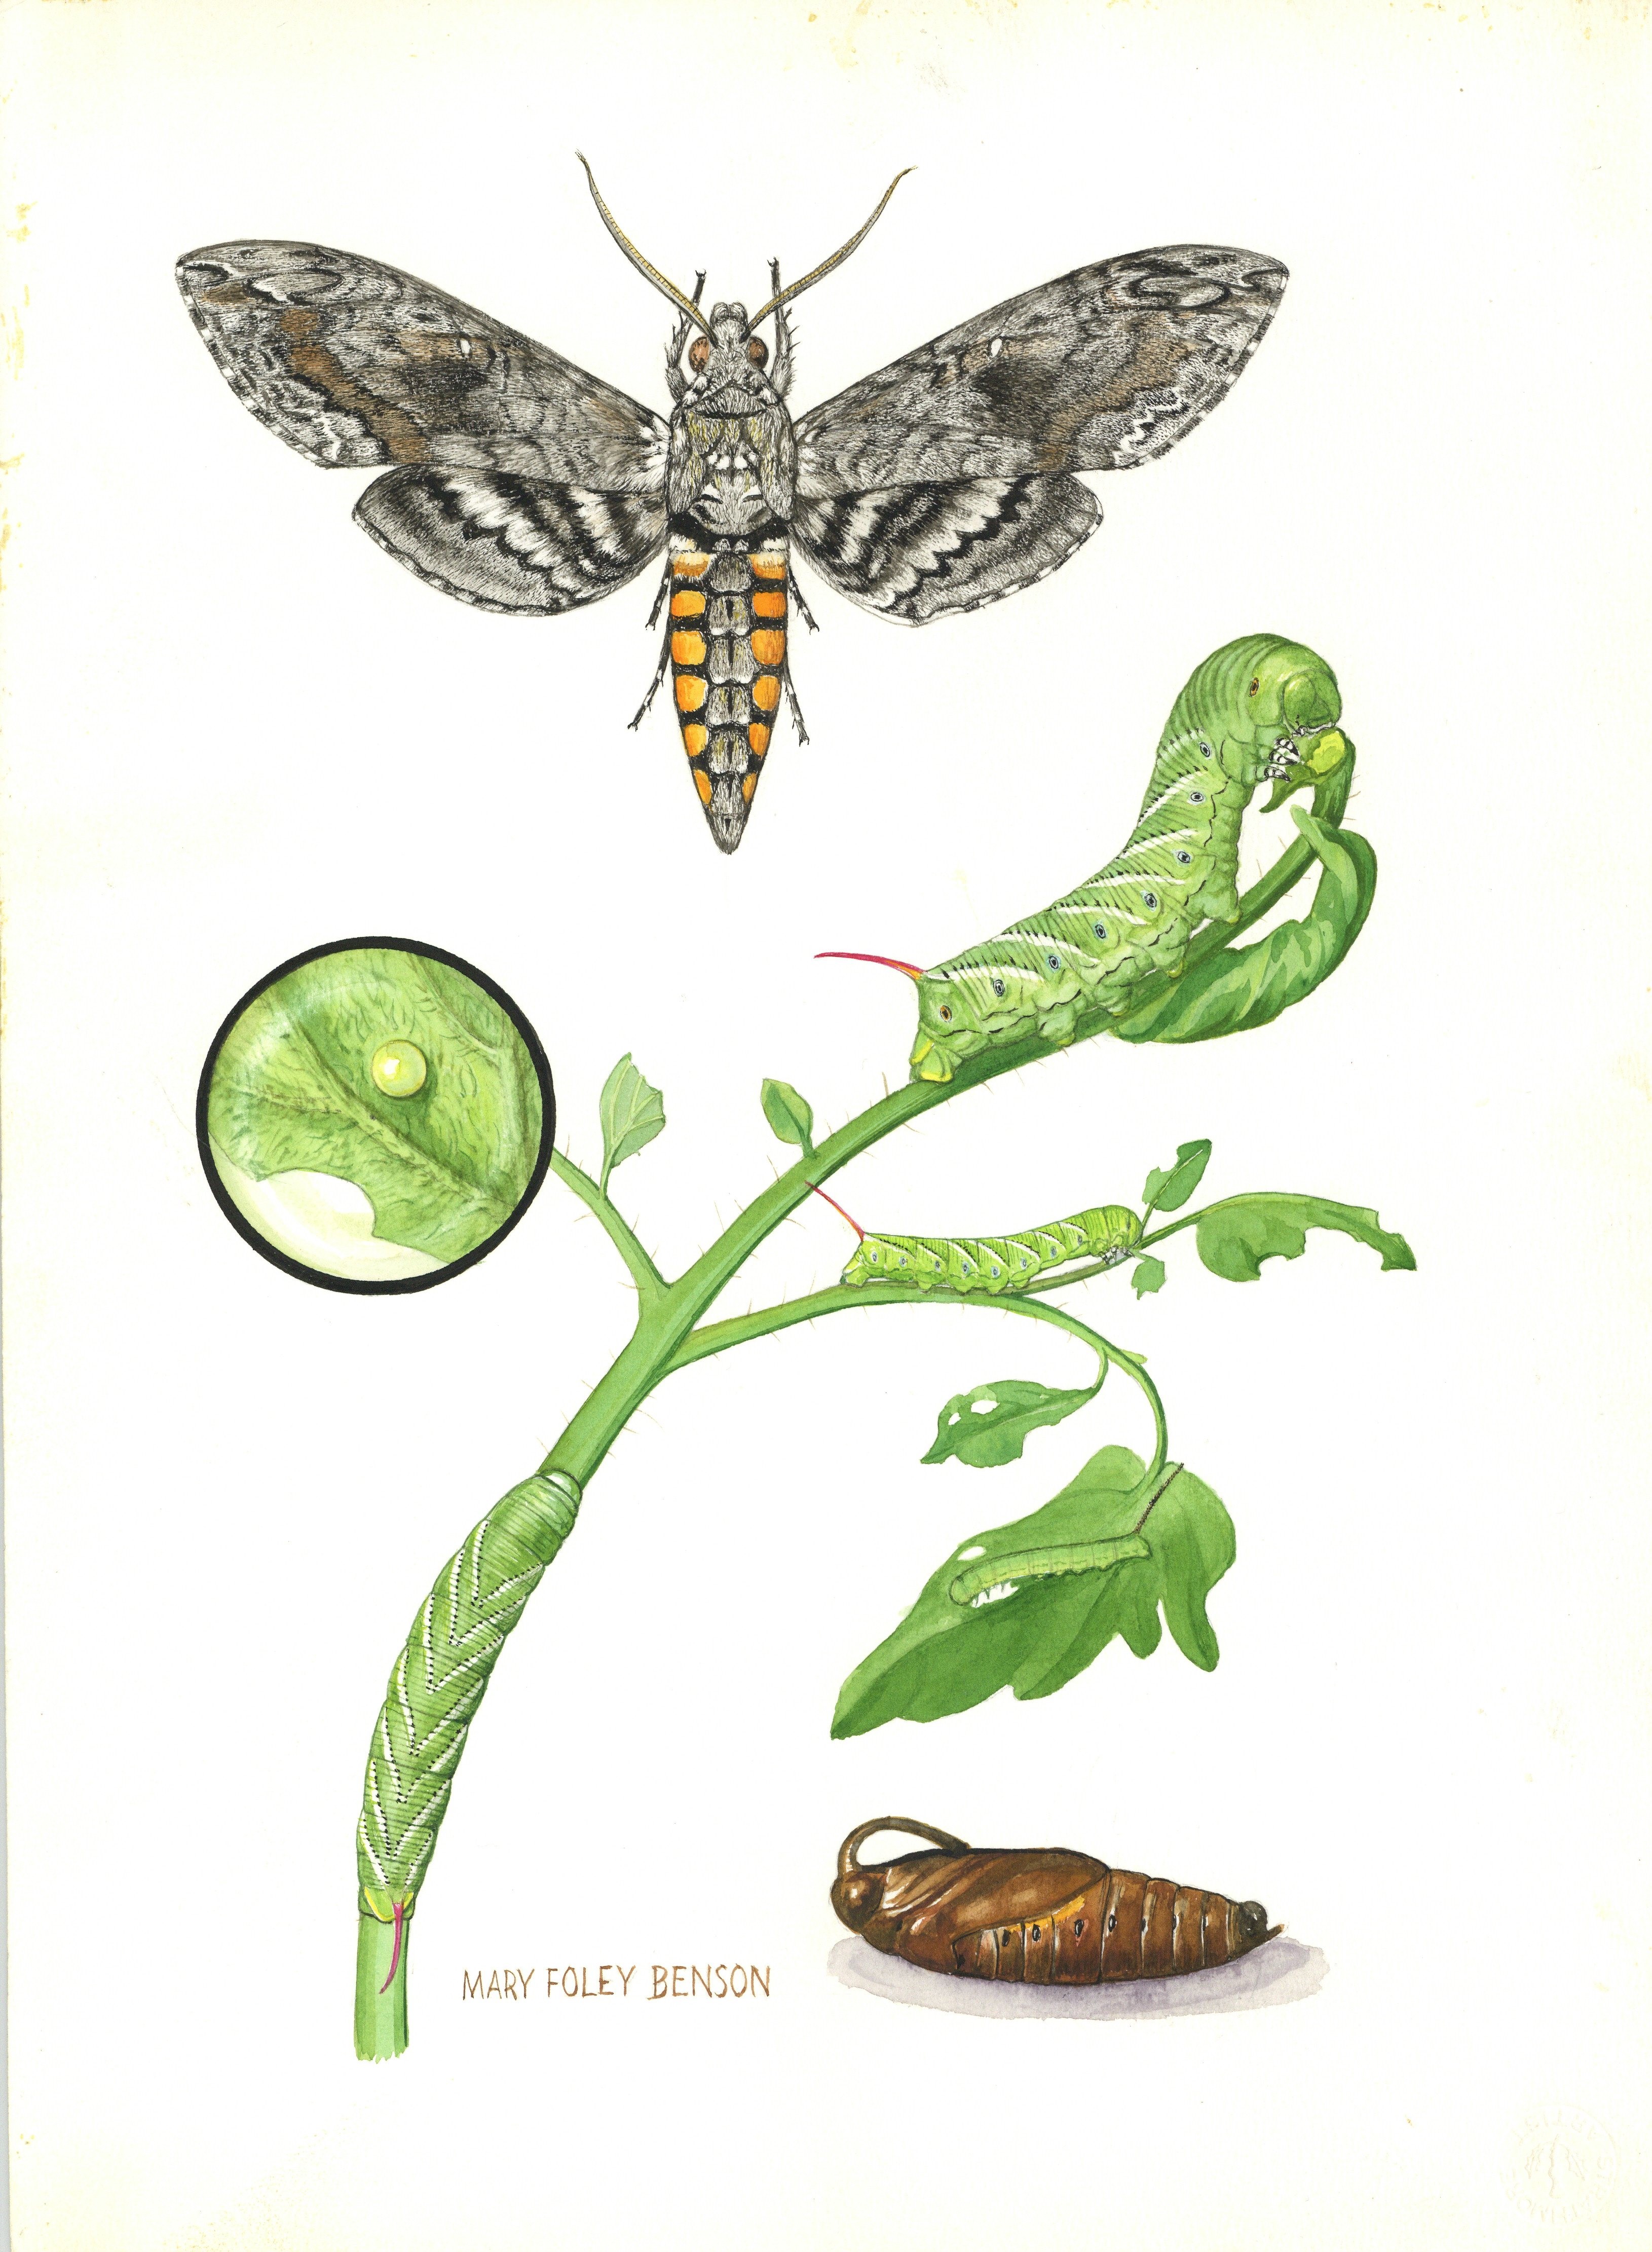 Figure 3: Mary Foley Benson, Tobacco hornworm (Manduca sexta) on tomato, n.d., watercolor. Digitized by the author.